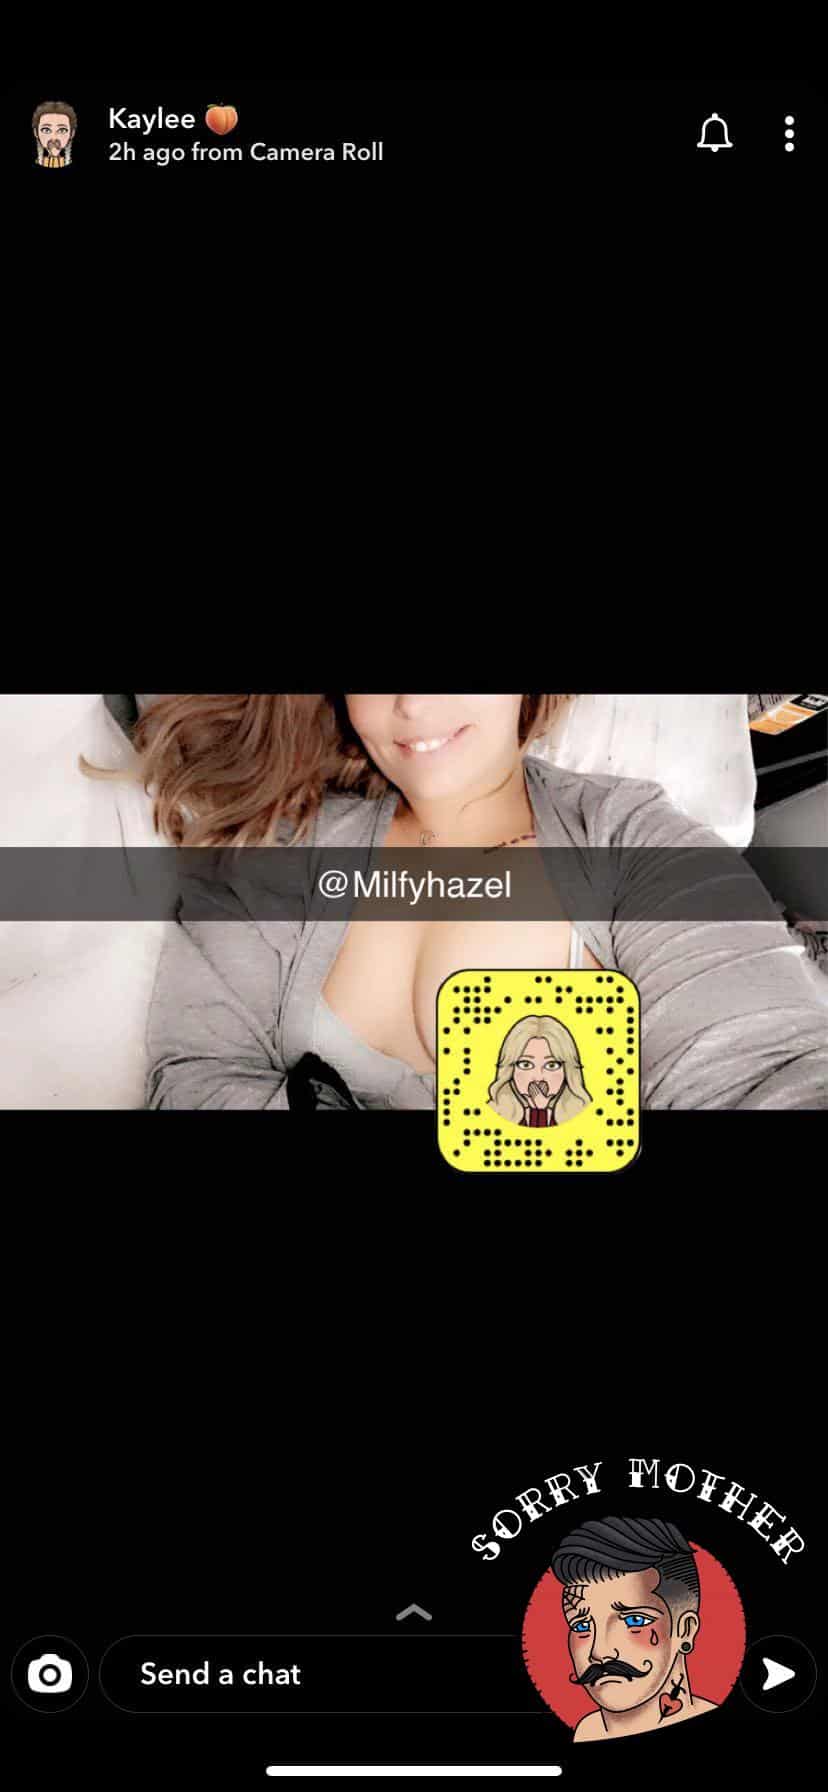 iwhxrz Add her for the good i444p64j6co51